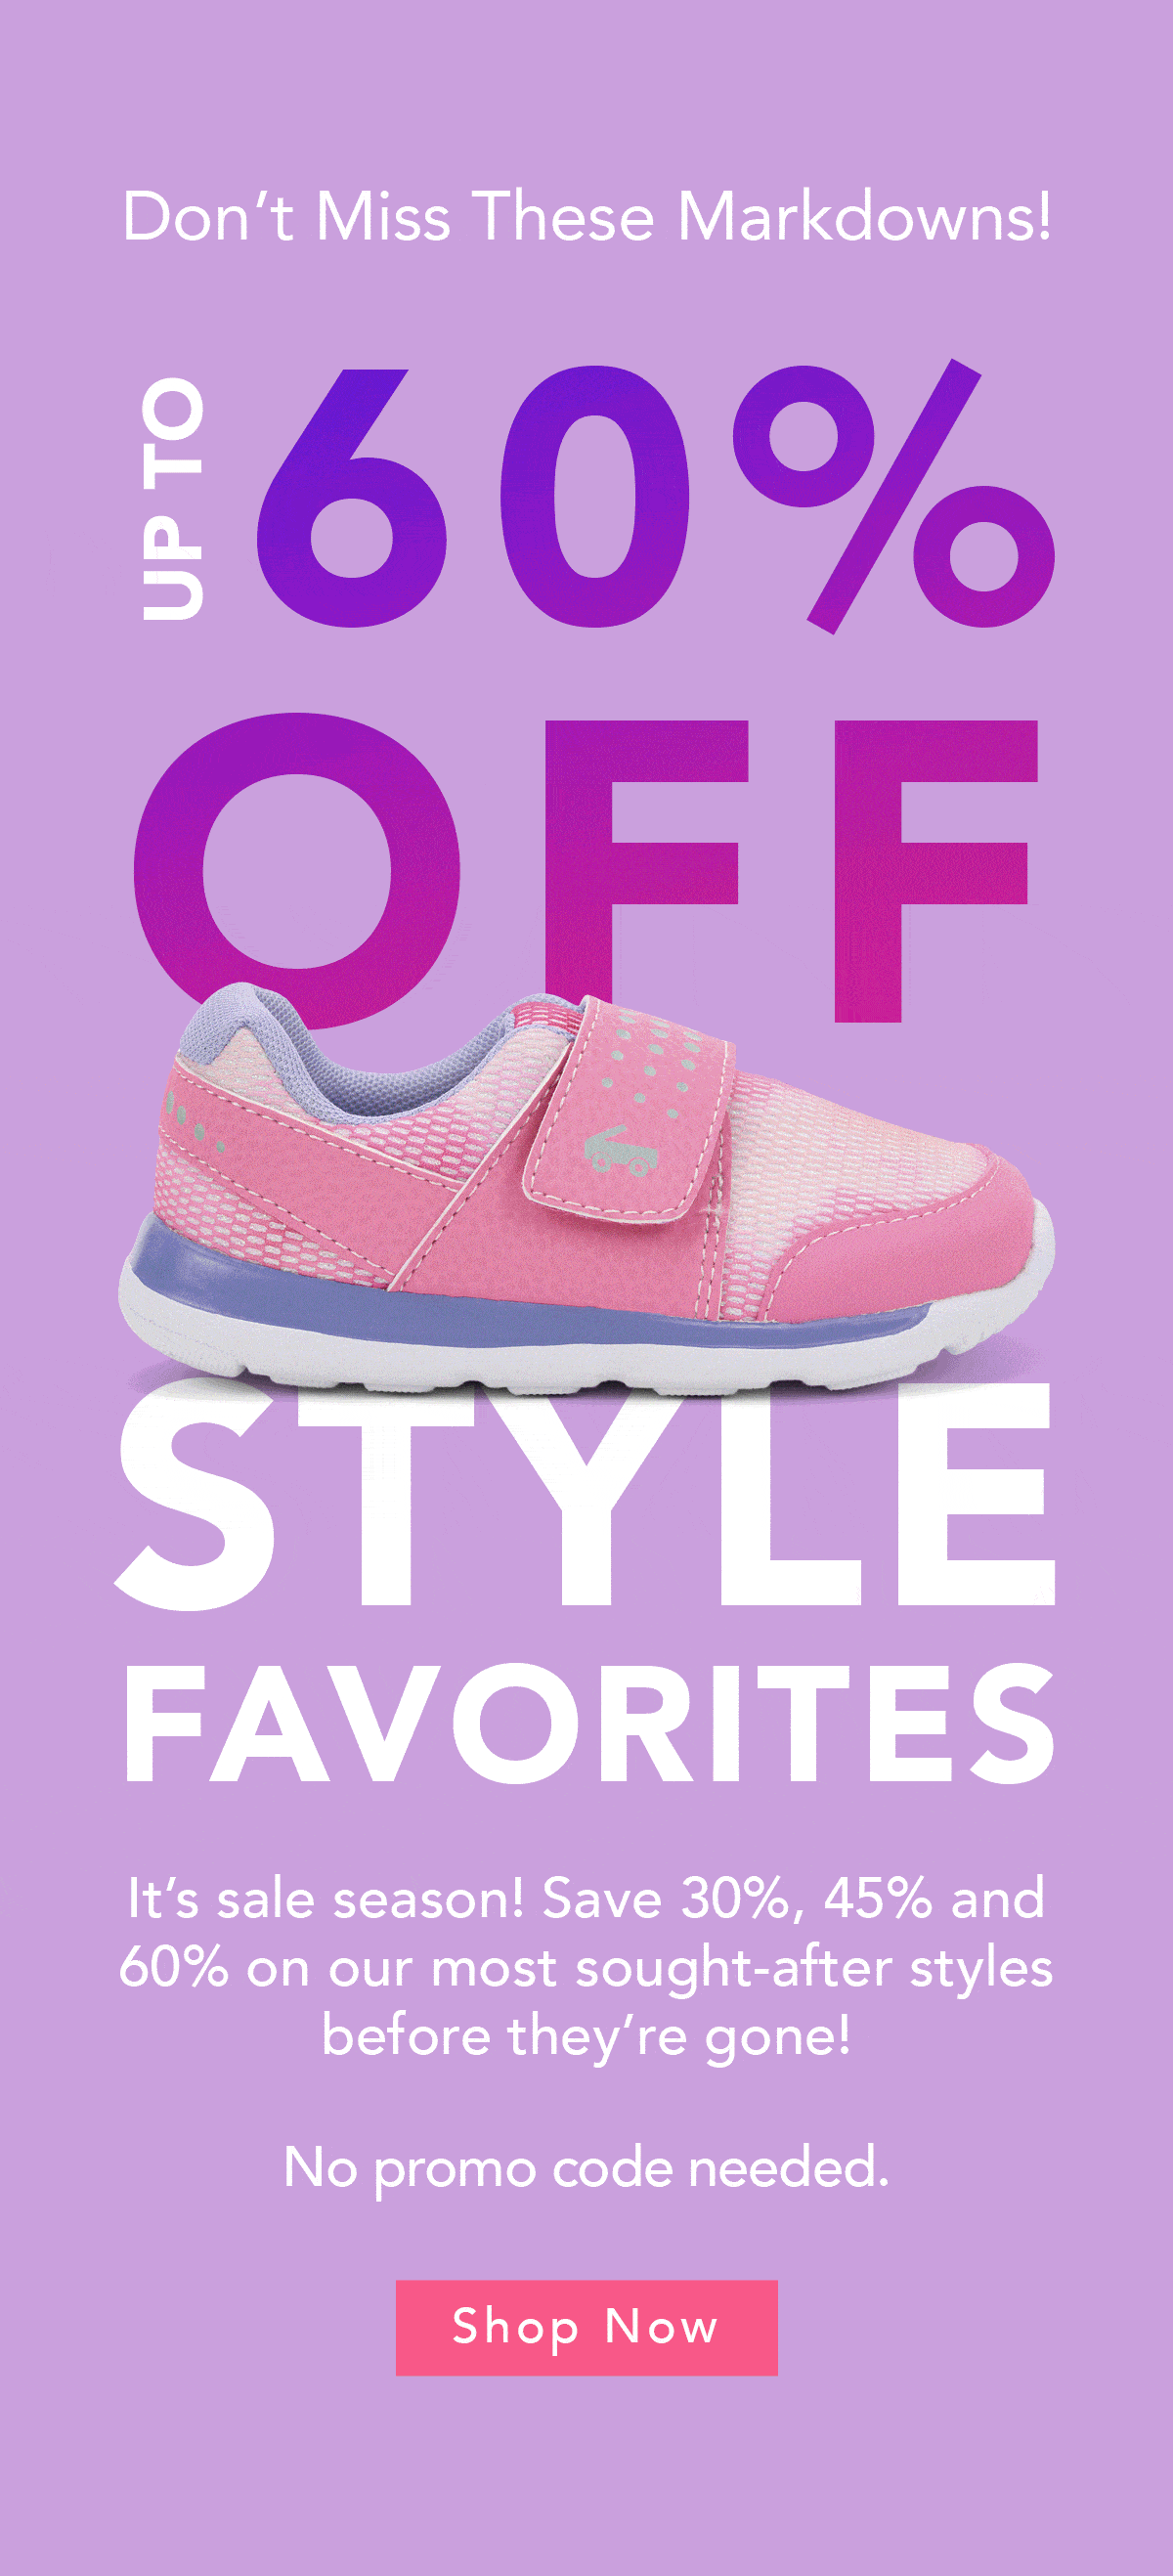 Style Favorites Up to 60% Off!